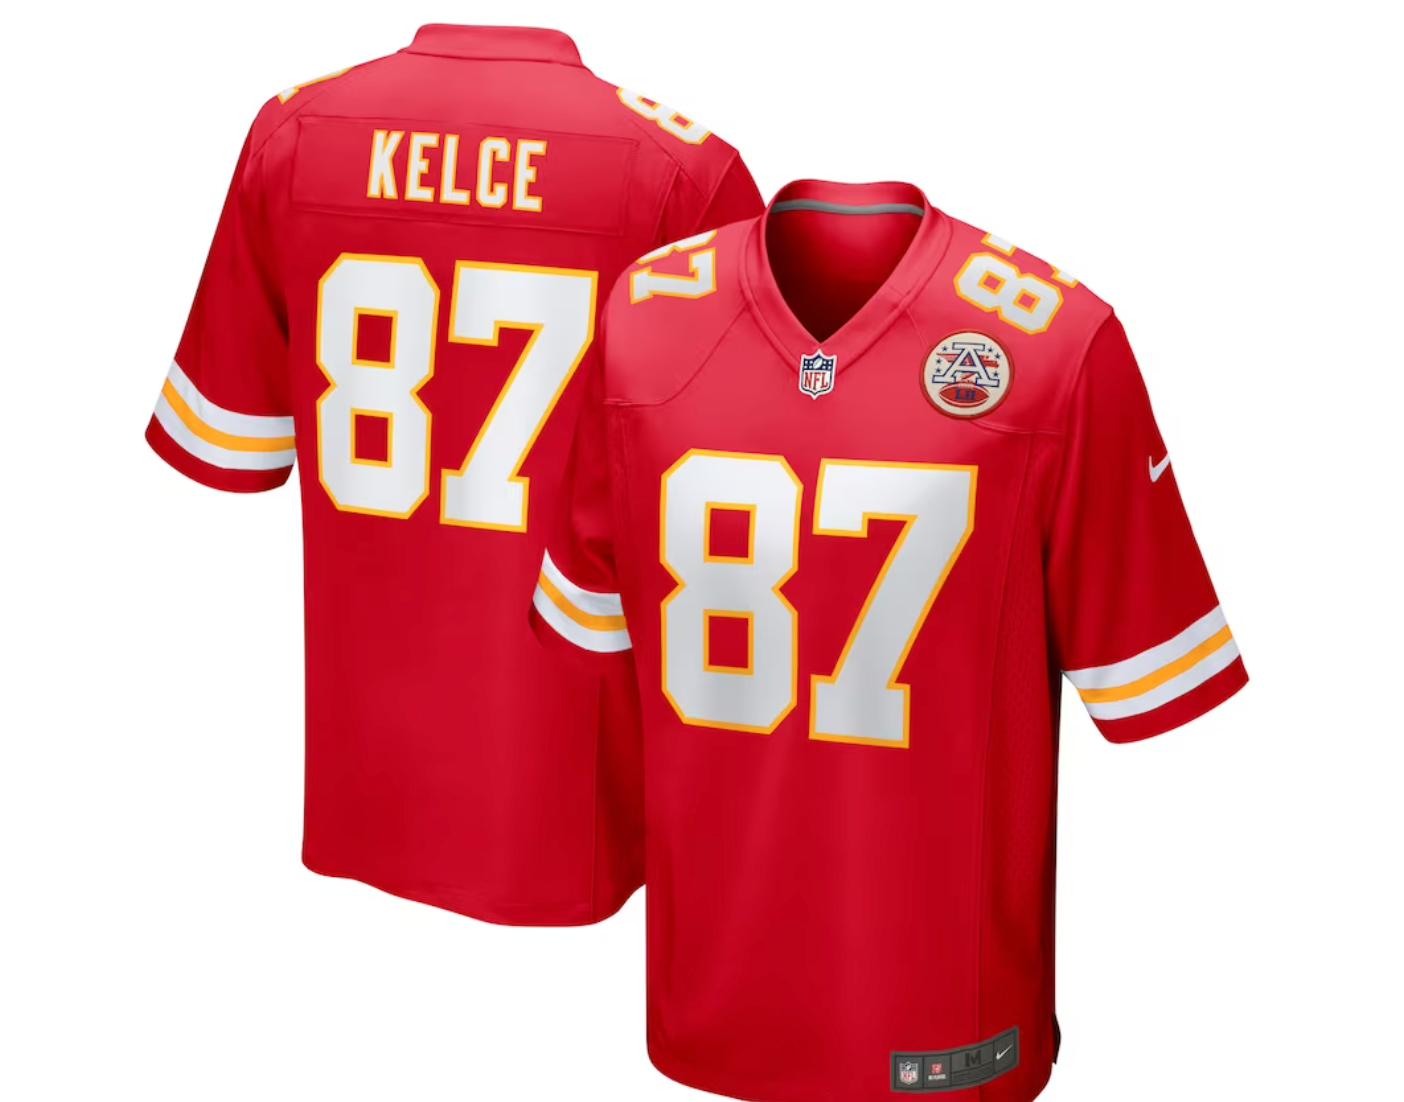 How to buy cheap(er) Travis Kelce jerseys and gear online 